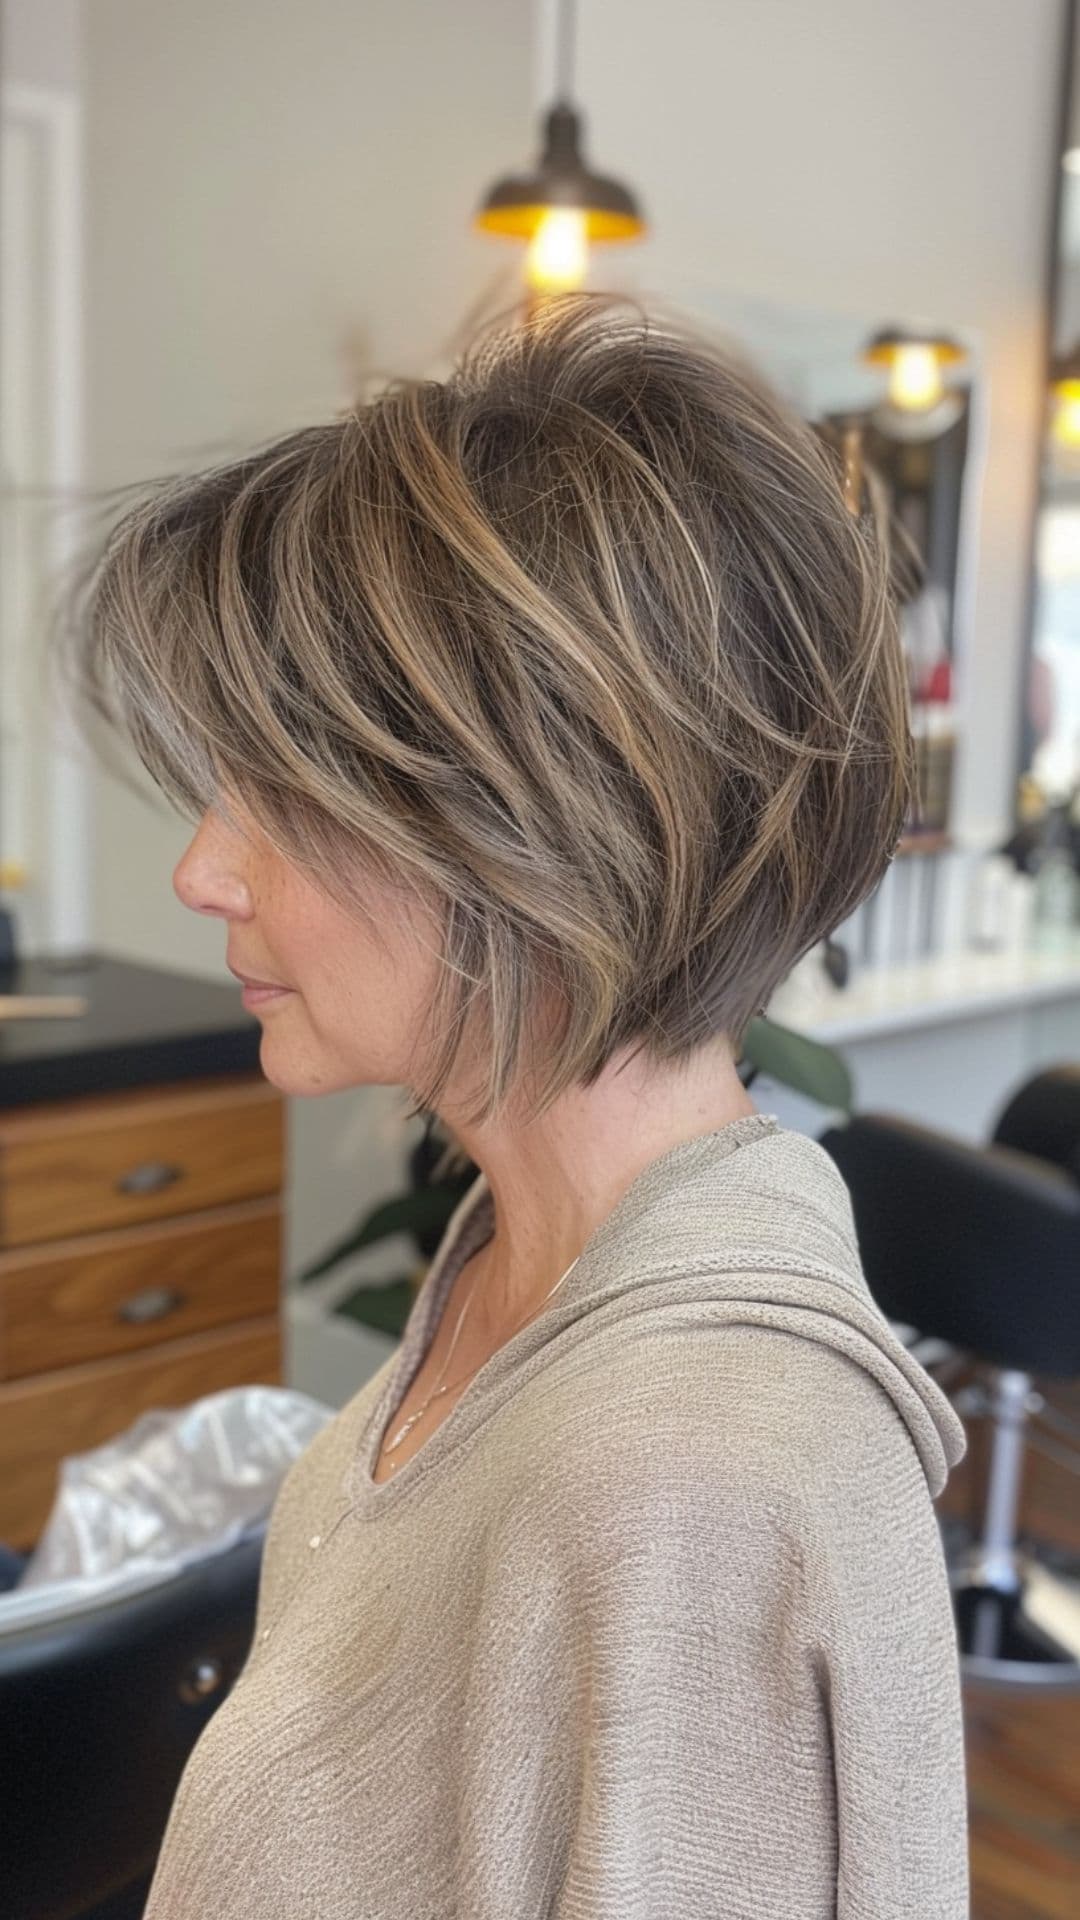 An old woman modelling an angled pixie bob with balayage.